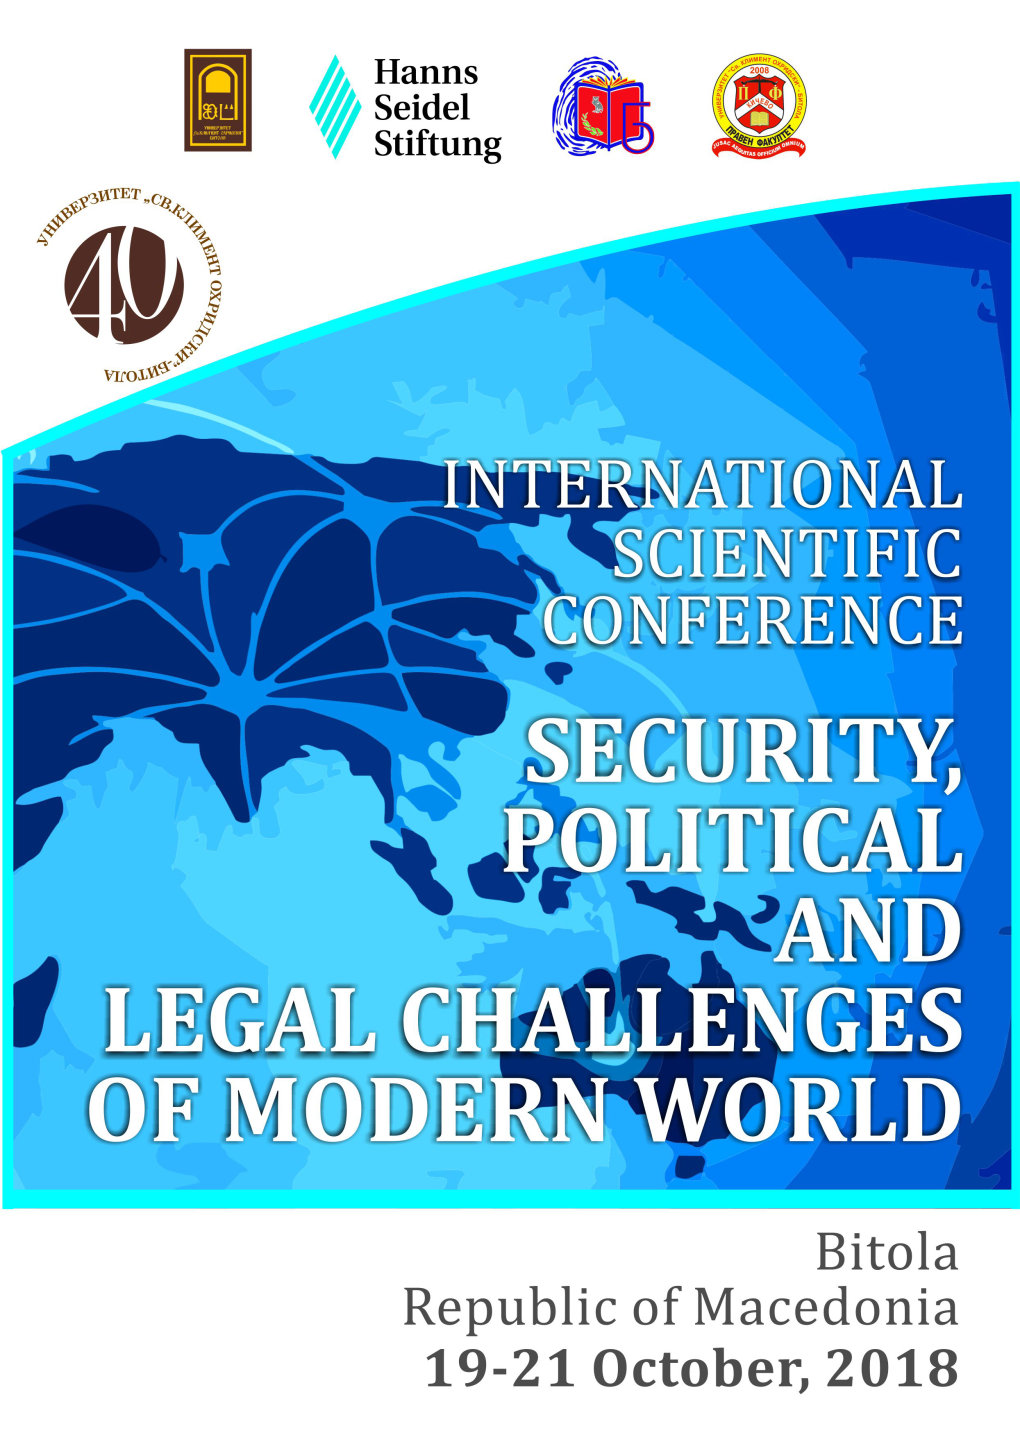 Security, Political and Legal Challenges of the Modern World”